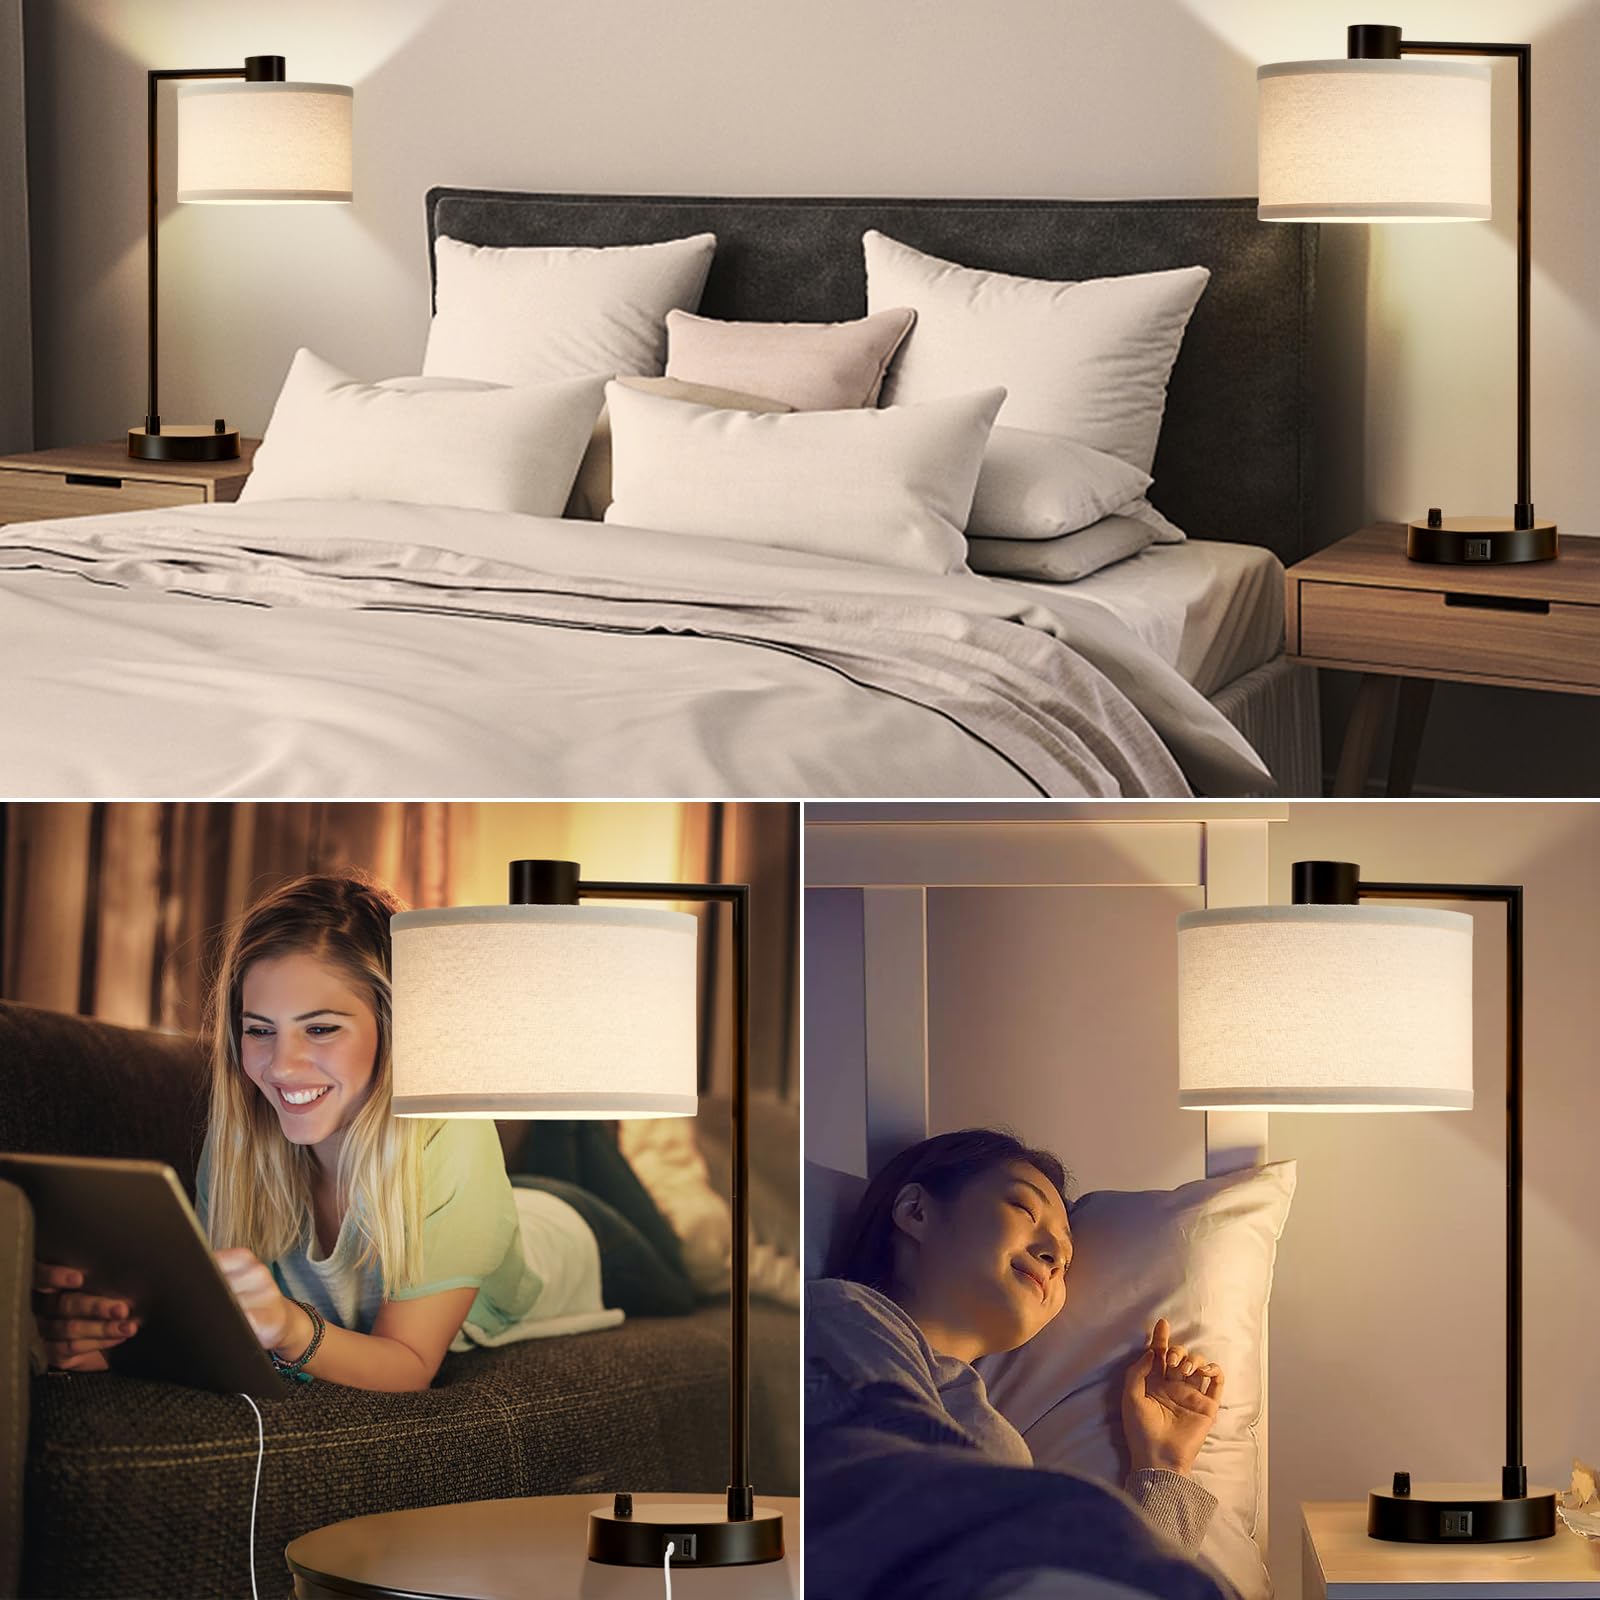 Luvkczc Table Lamp for Bedroom Set of 2 with USB C+A Ports, Fully Stepless Dimmable Bedside Lamp with Linen Lampshade, Contemporary Lamp for Living Room Reading Office, 2 LED Bulbs Included (Black)